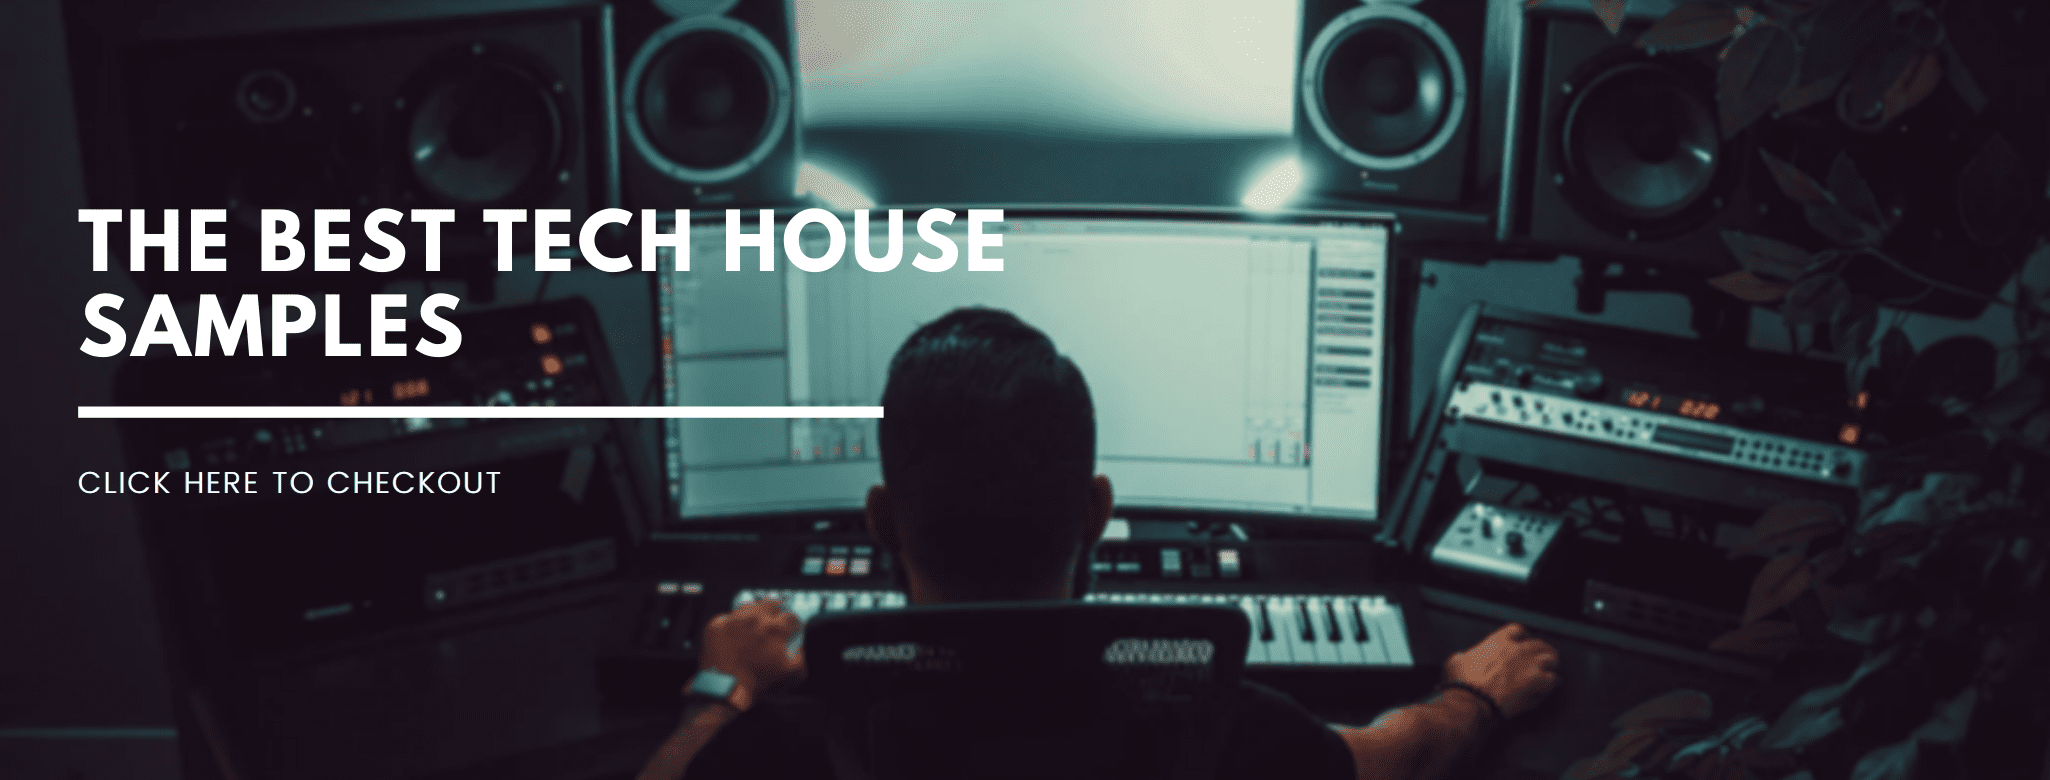 the best tech house samples